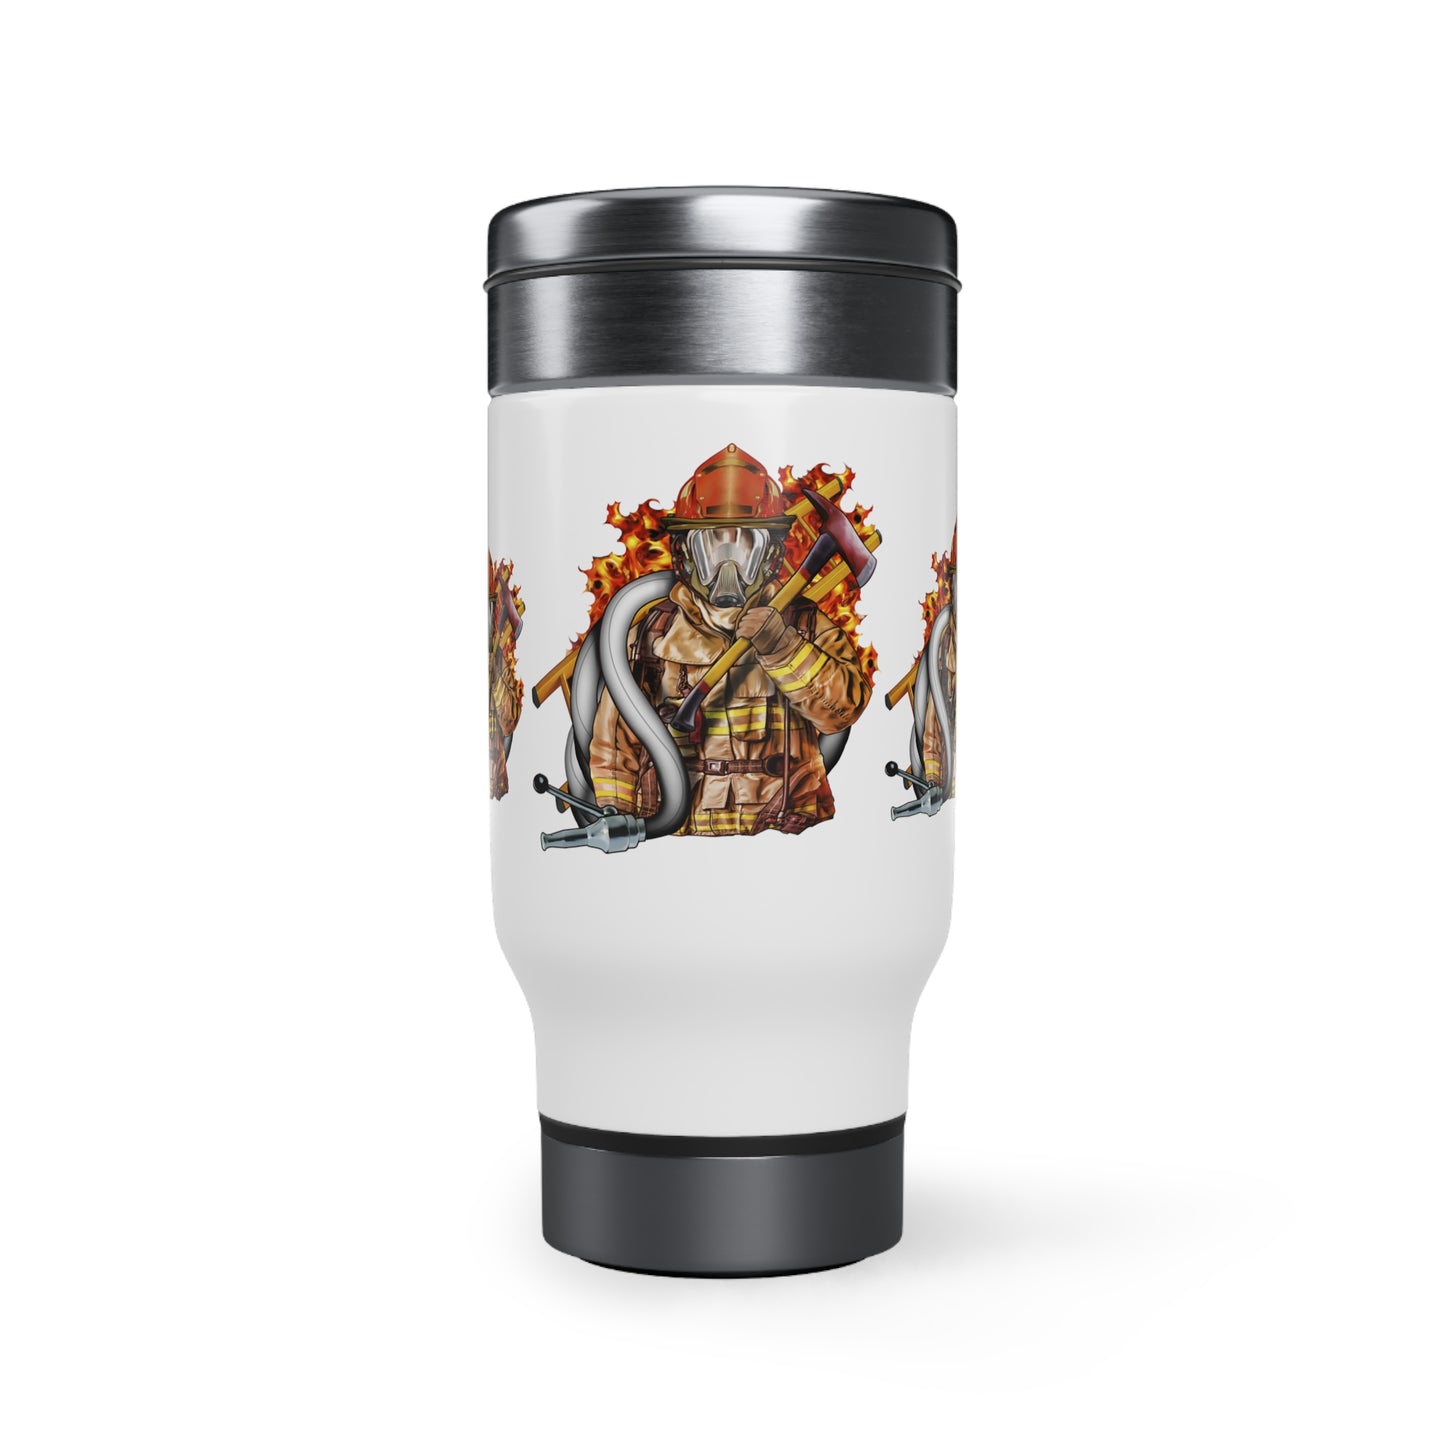 Fire Fighter -Stainless Steel Travel Mug with Handle, 14oz